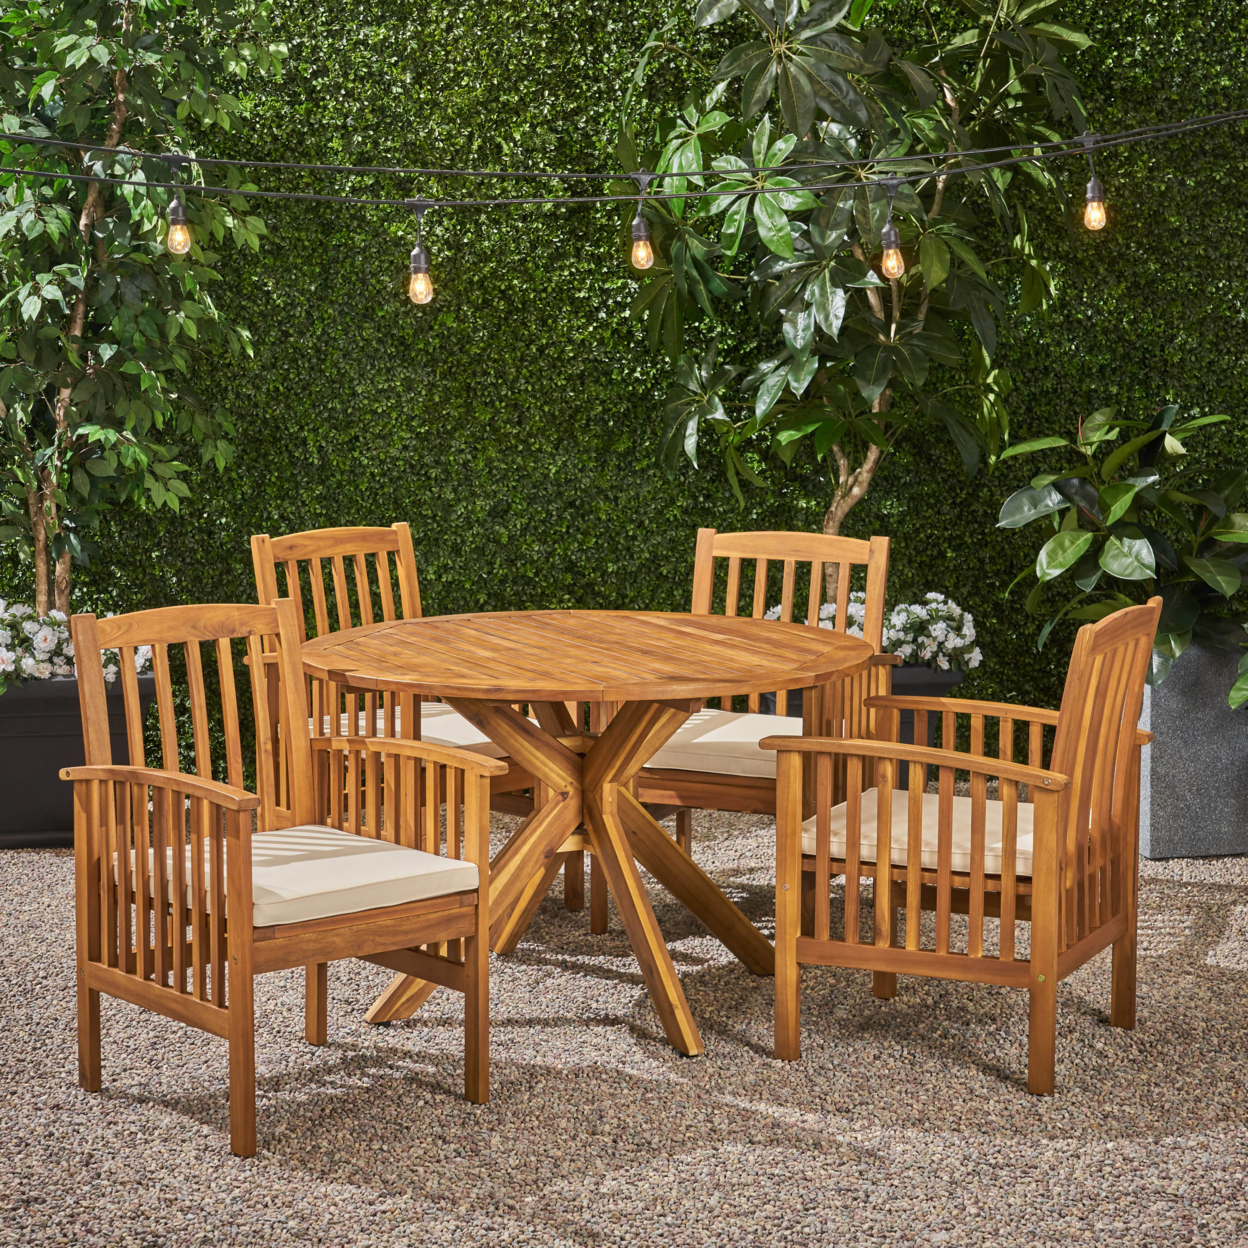 Phoenix Outdoor Acacia 4-Seater Dining Set With Cushions And 47 Round Table With X-Legs - Gray / Cream